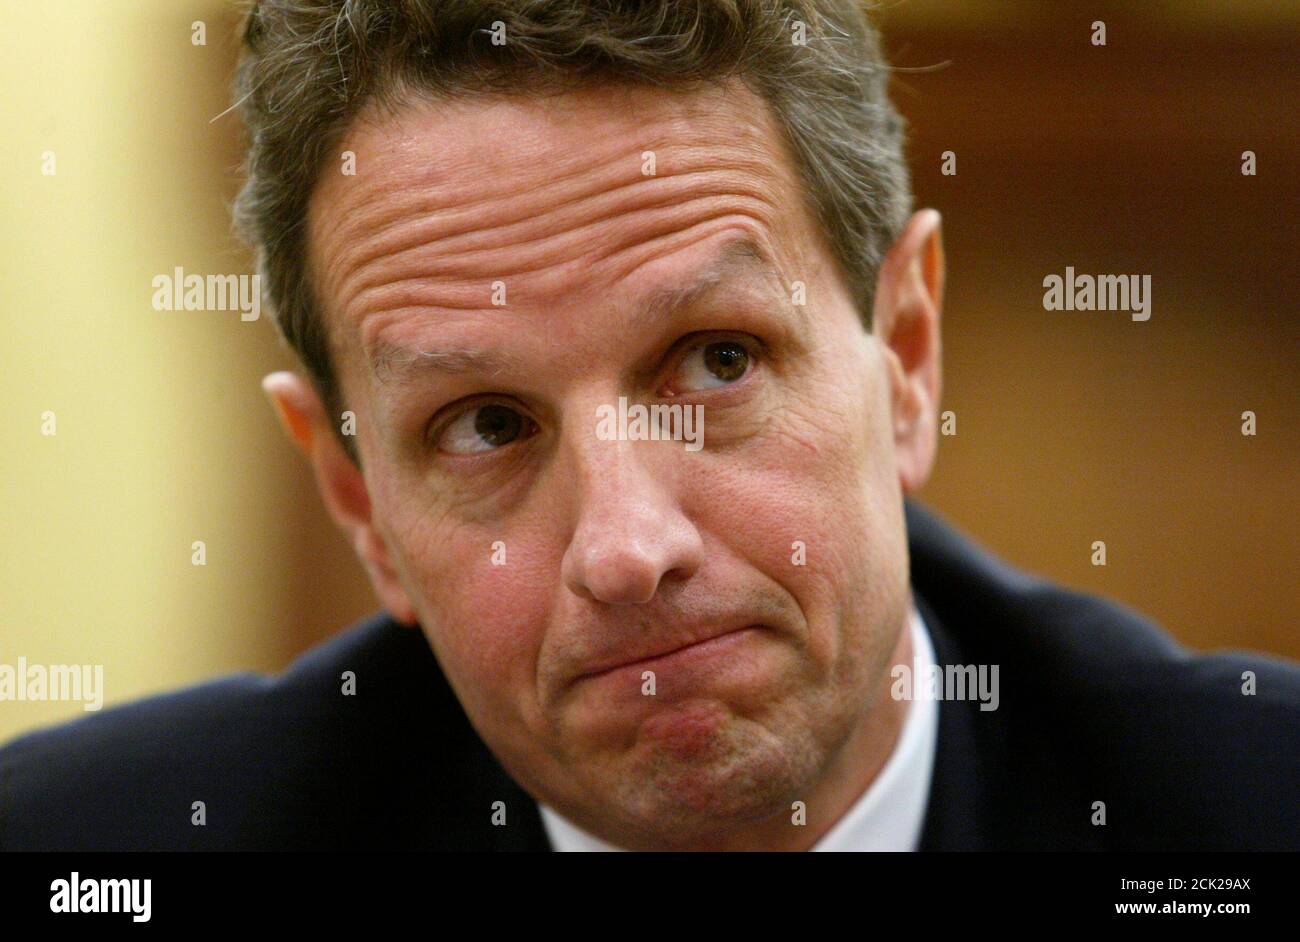 U.S. Treasury Secretary Timothy Geithner testifies about the Obama administration's budget proposals and goals for economic recovery and reform before the House Appropriations Subcommittee on General Government and Financial Services in Washington, May 21, 2009. Geithner said that a bailout for banks was steadying the financial system but care must be taken to ensure that normal market forces are allowed to operate.  REUTERS/Jim Bourg   (UNITED STATES BUSINESS POLITICS) Stock Photo